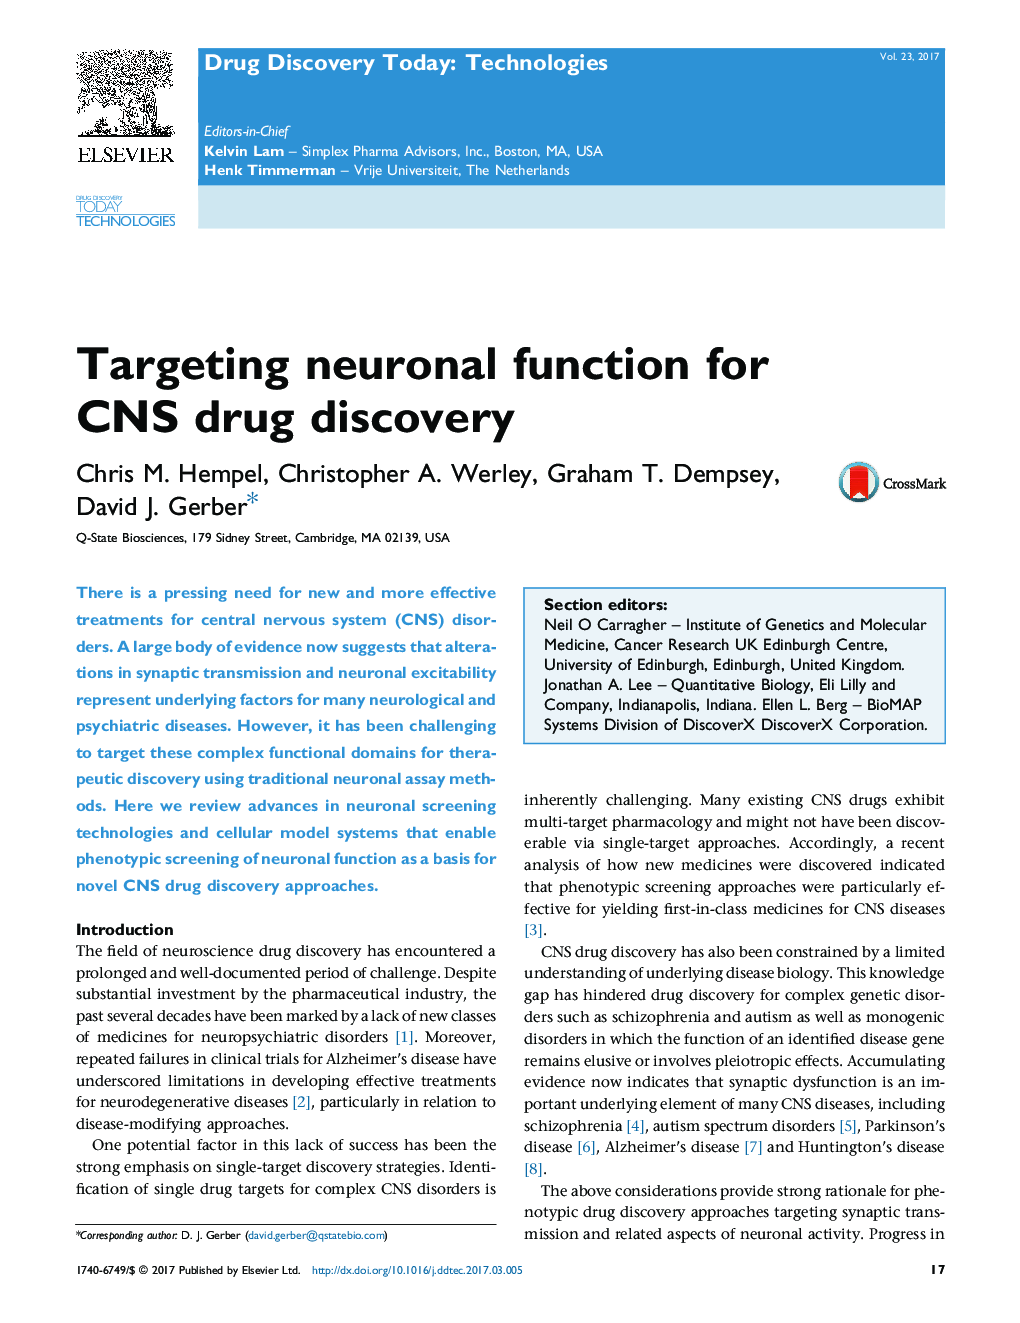 Targeting neuronal function for CNS drug discovery